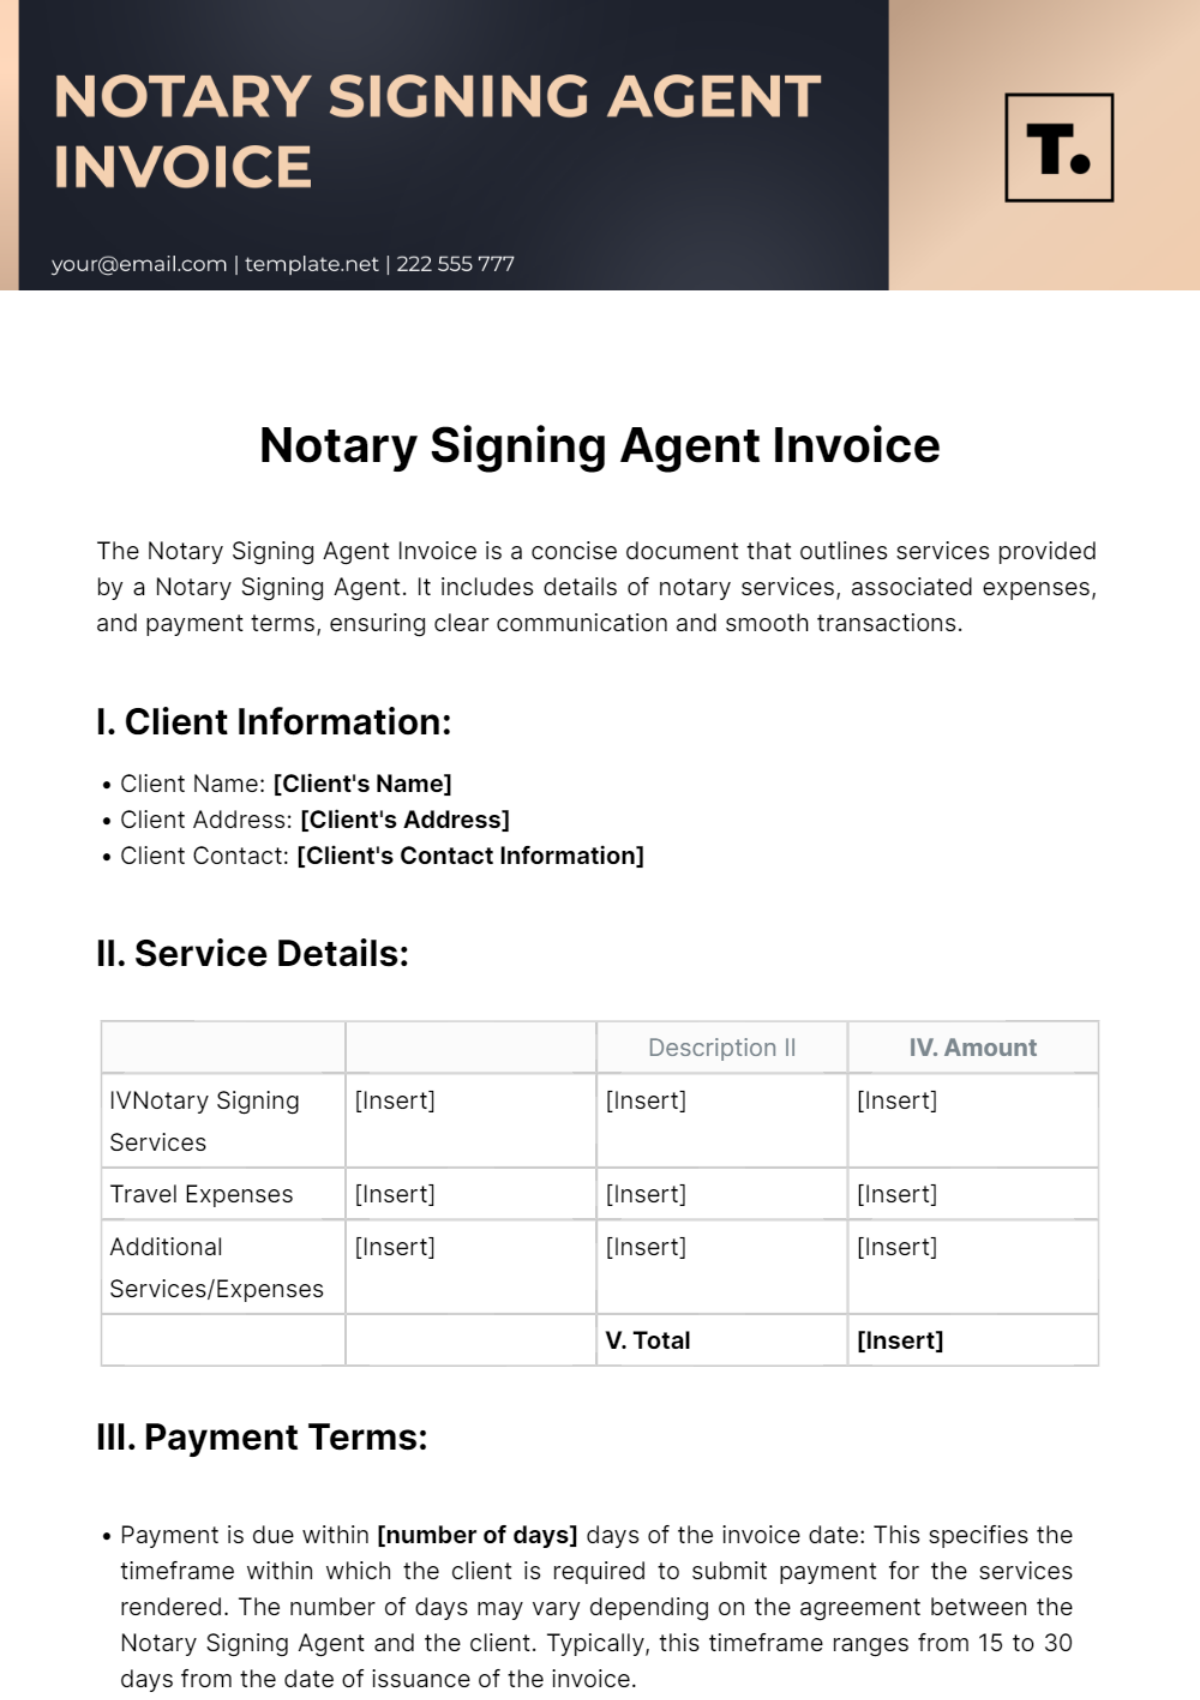 Notary Signing Agent Invoice Template